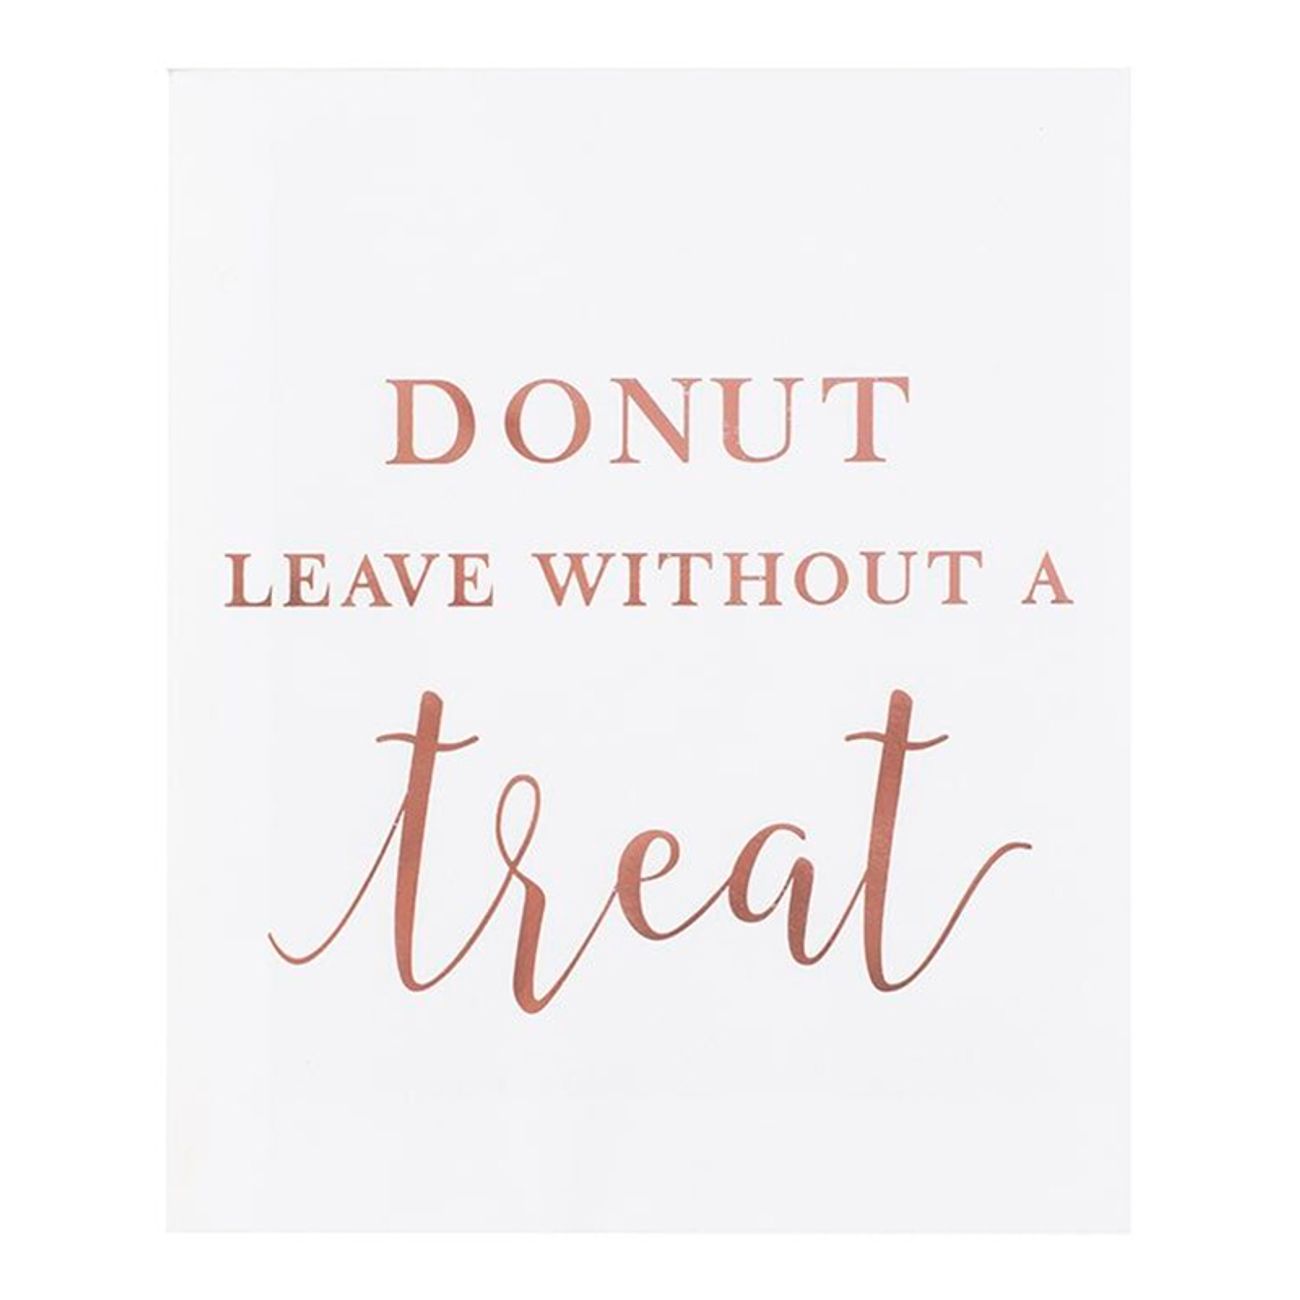 pasar-donut-leave-without-a-treat-73624-1